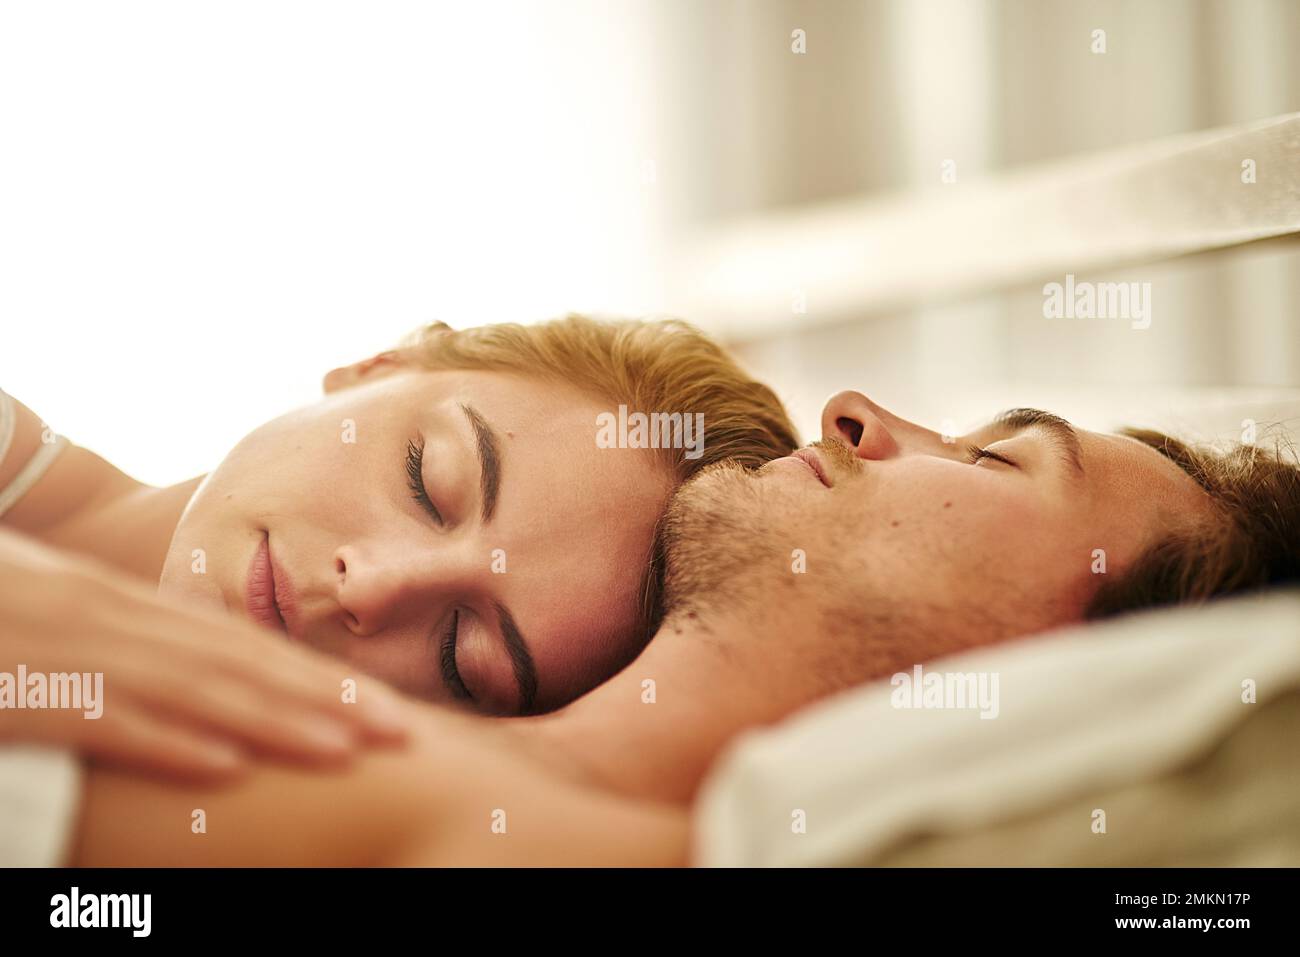 His heart beats for her. a young couple asleep in bed at home. Stock Photo